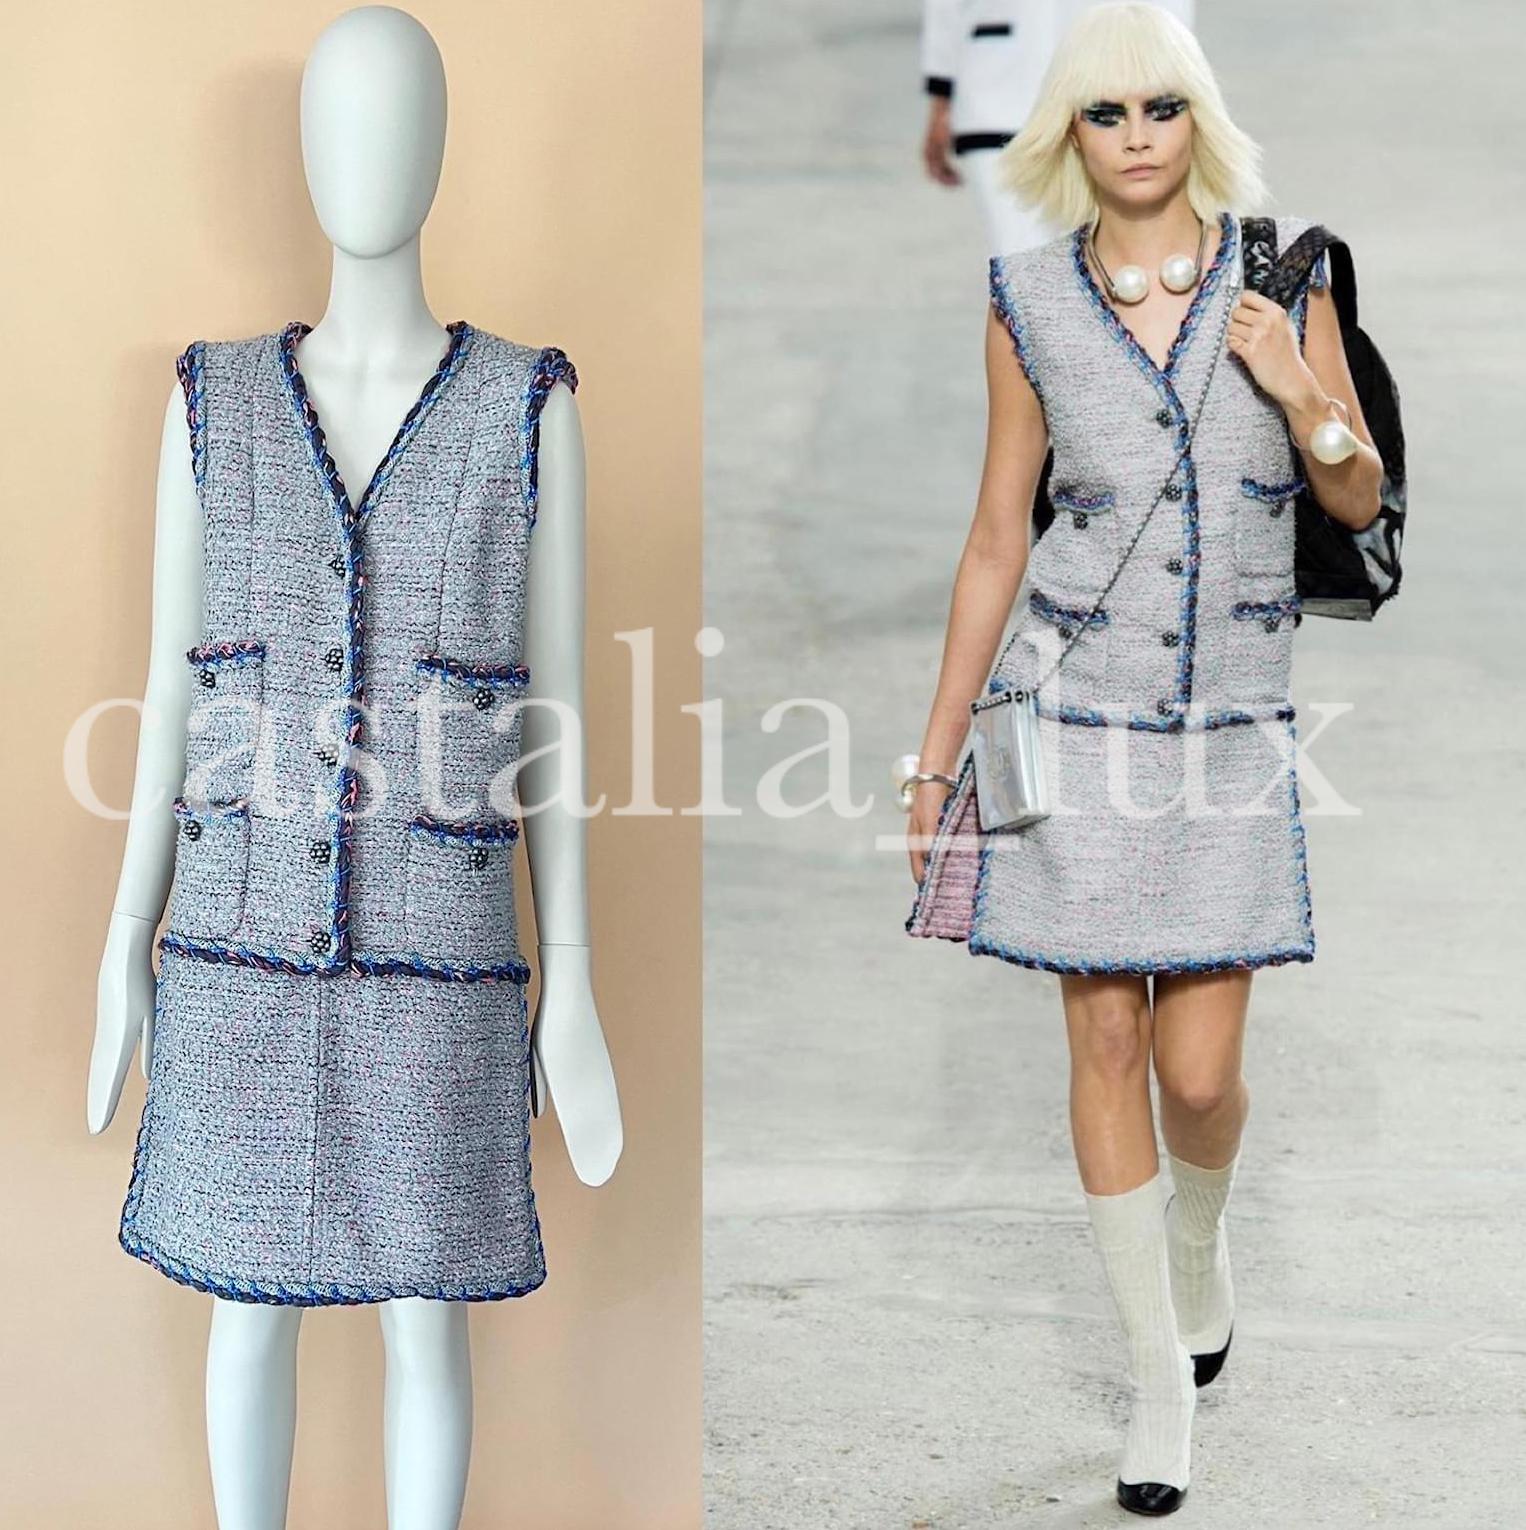 2 days DHL Express delivery worldwide, 
not negotiable
Look # 1 From Runway of 2014 Spring Collection - as seen Cara Delevingne! 
Boutique price 8,860$ 
Size mark 42 FR. 
Never Worn.
- made of grey shimmering lesage tweed with signature braided trim